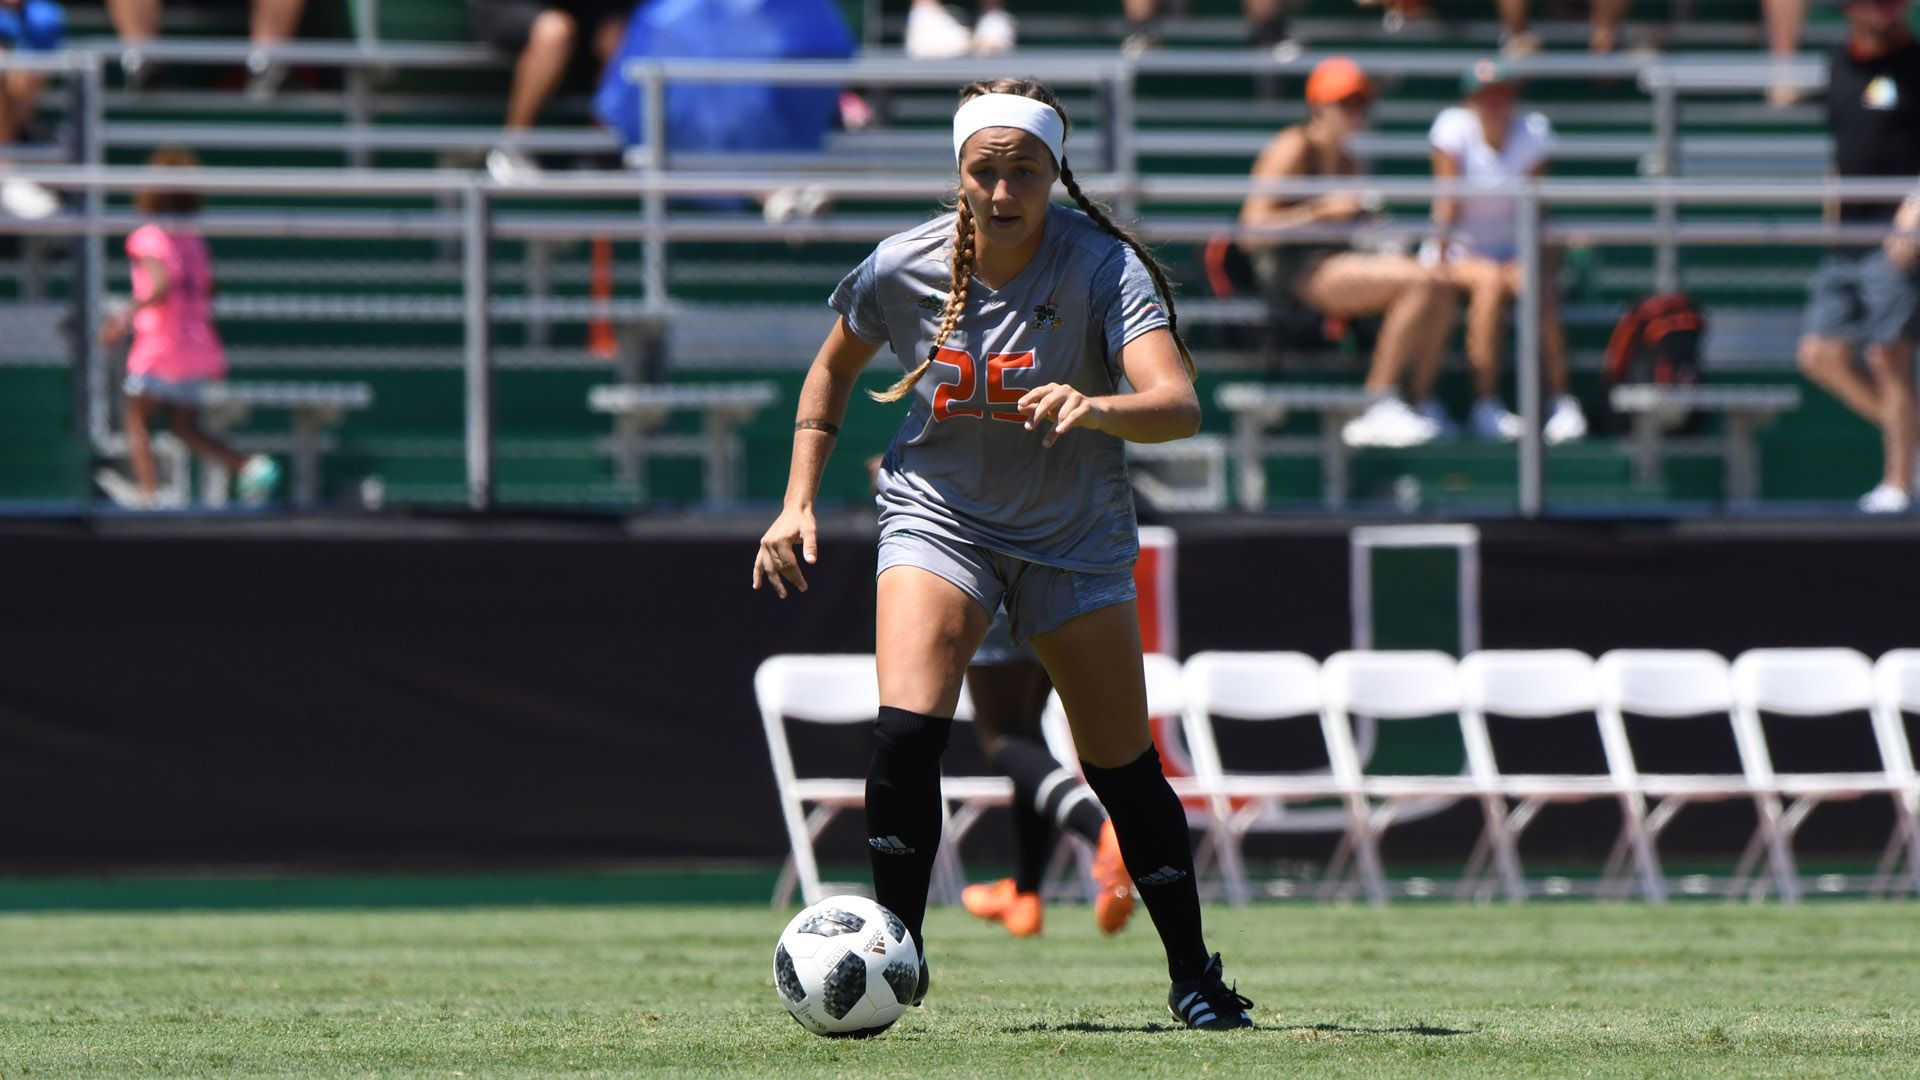 Canes Set to Battle Third Ranked UNC